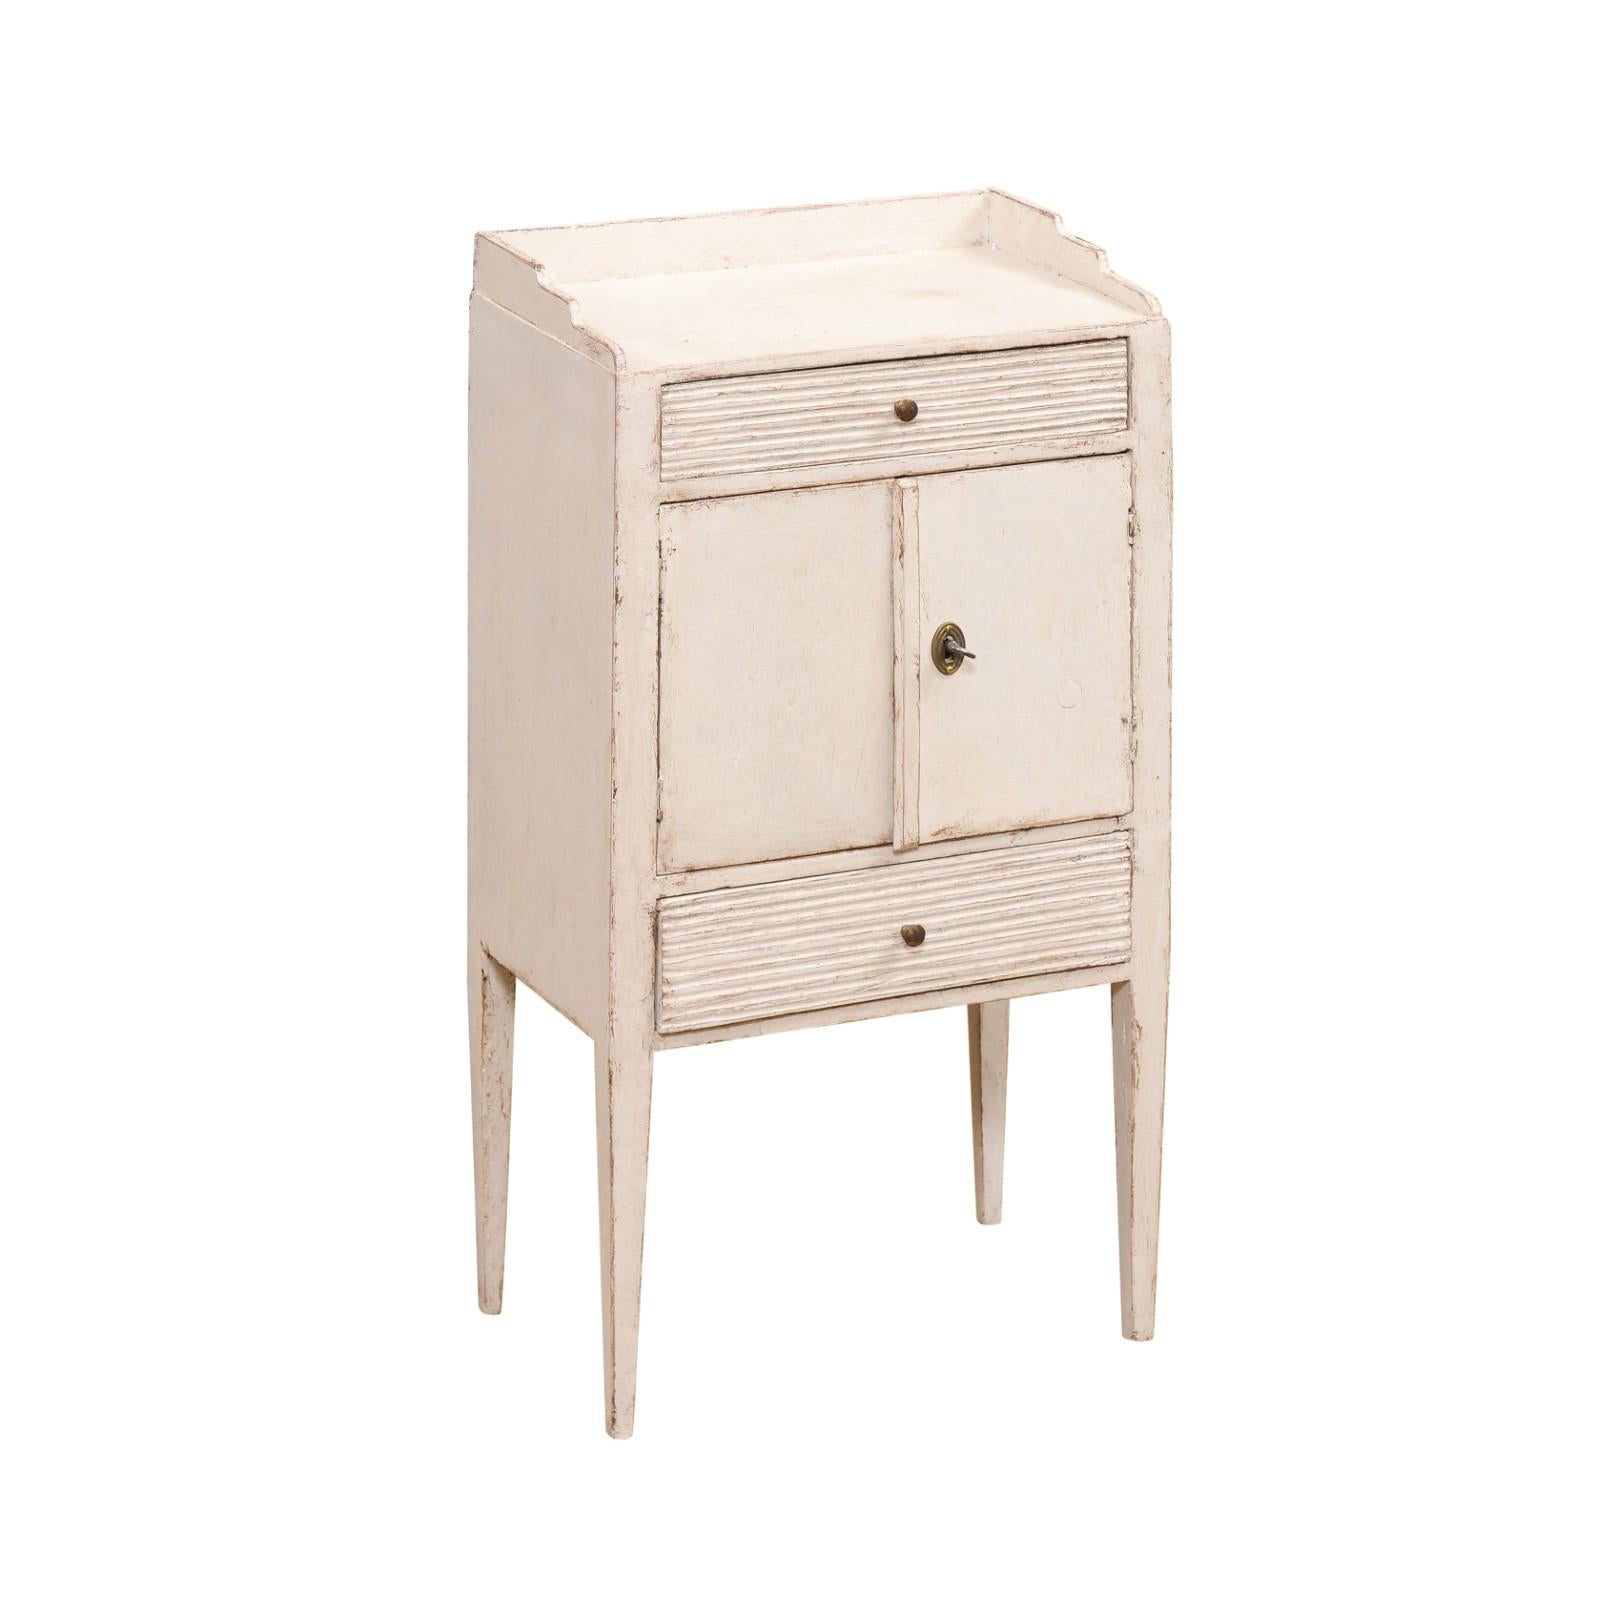 A Swedish late Gustavian painted wood bedside table from the early 19th century, with two reeded drawers, double doors and three quarter gallery. Created in Sweden during the first quarter of the 19th century, this bedside table showcases the